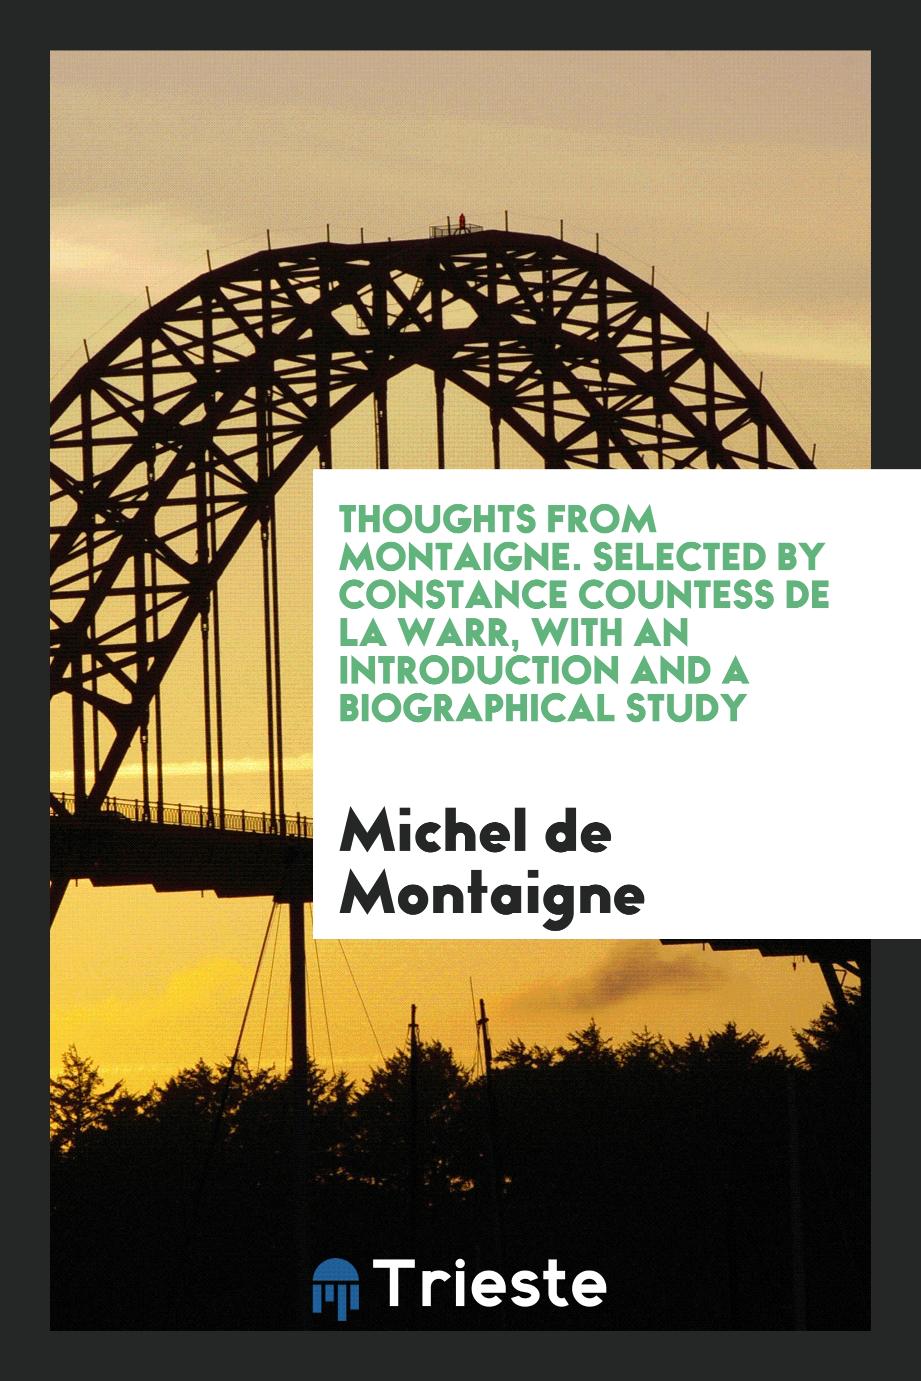 Thoughts from Montaigne. Selected By Constance Countess de la Warr, With an Introduction and a Biographical Study